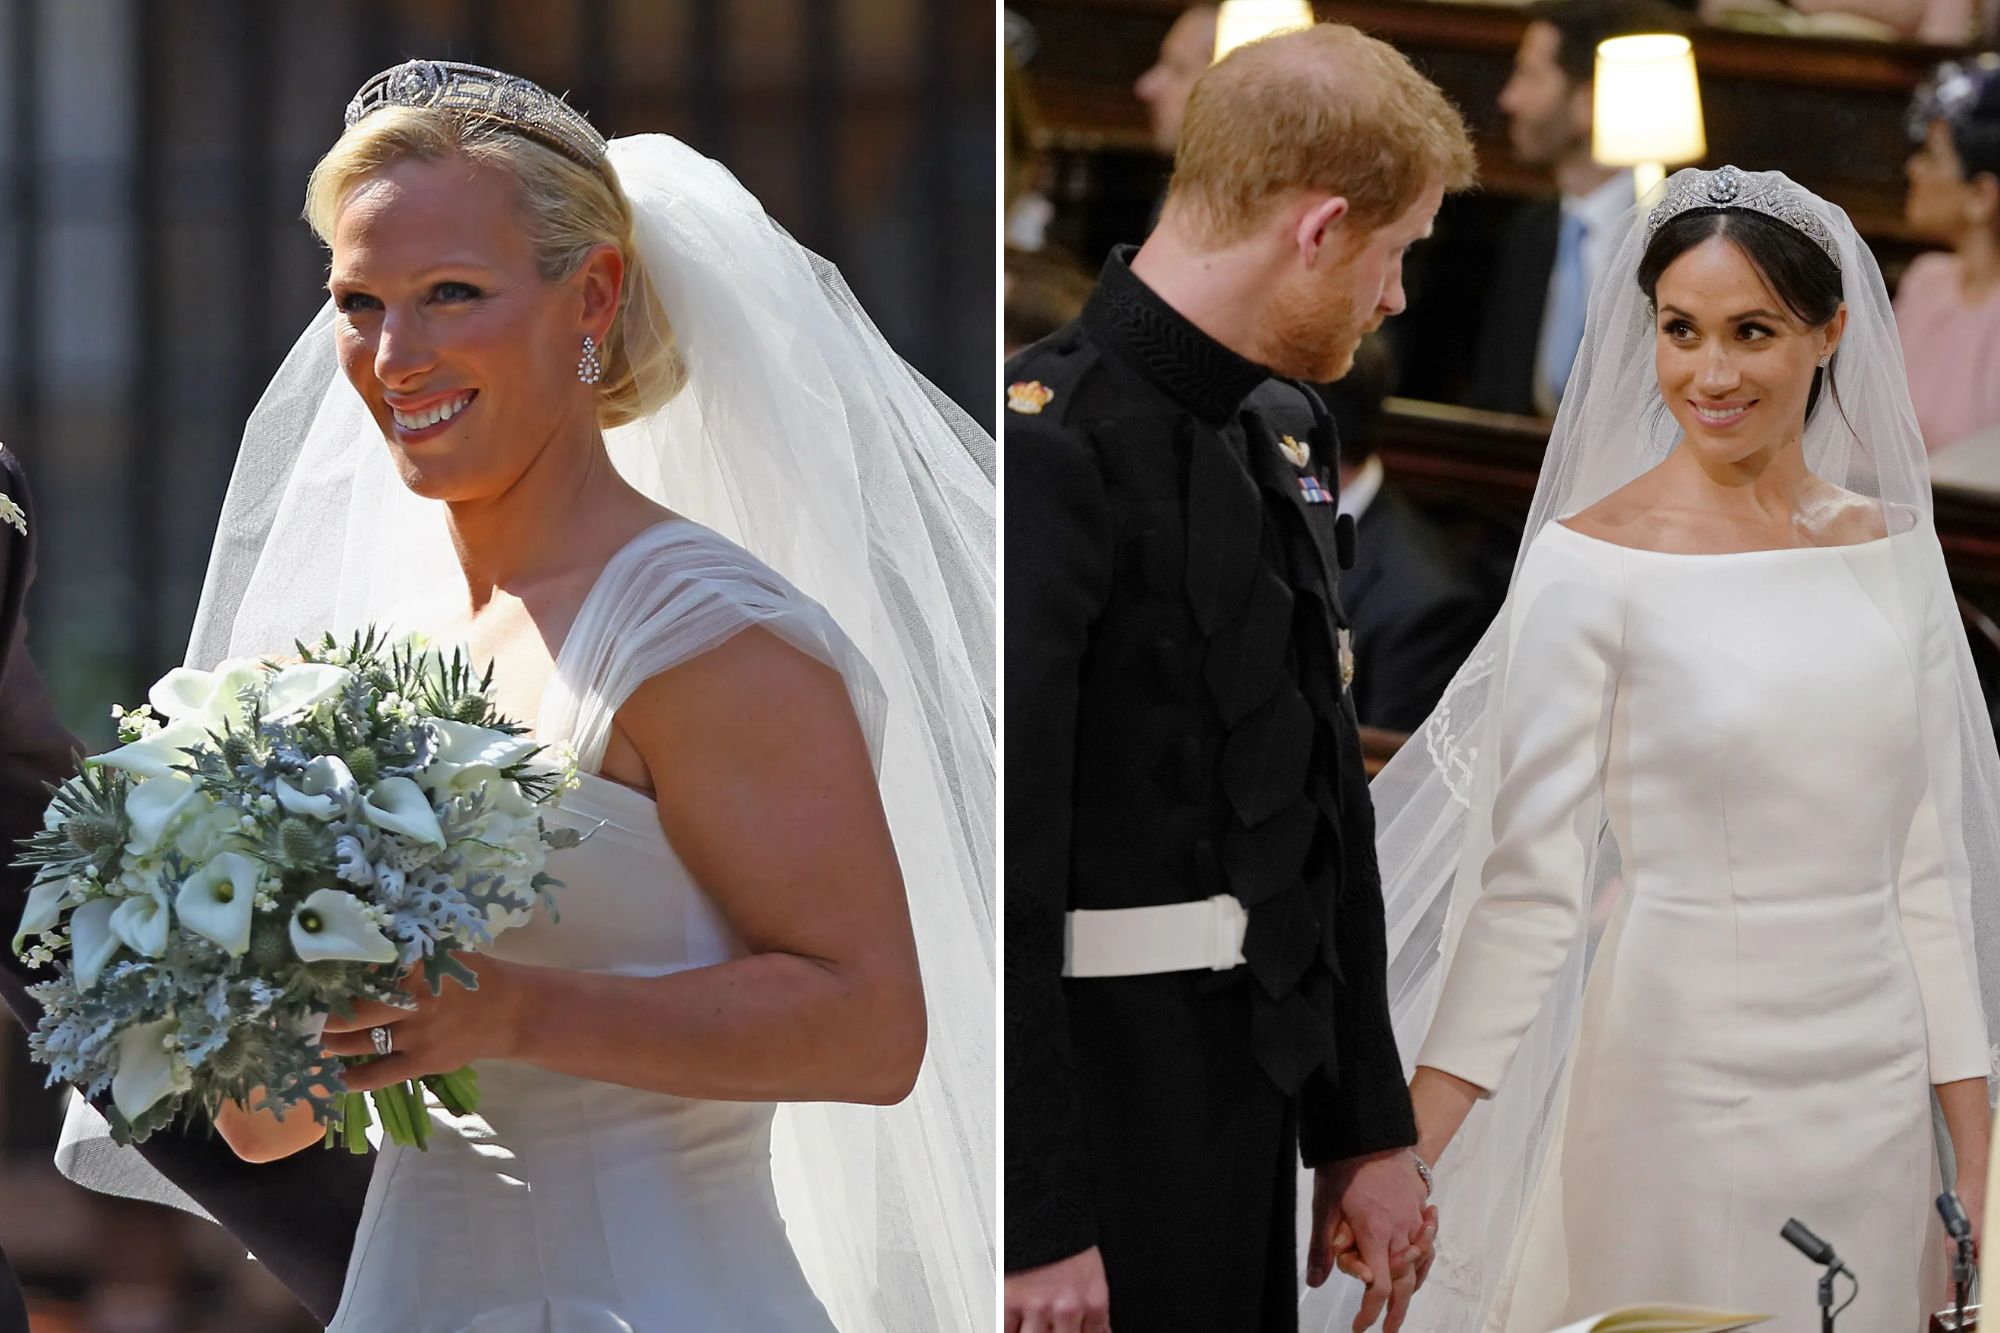 Special meaning behind Zara’s £4m wedding item & how Meghan’s was worth half